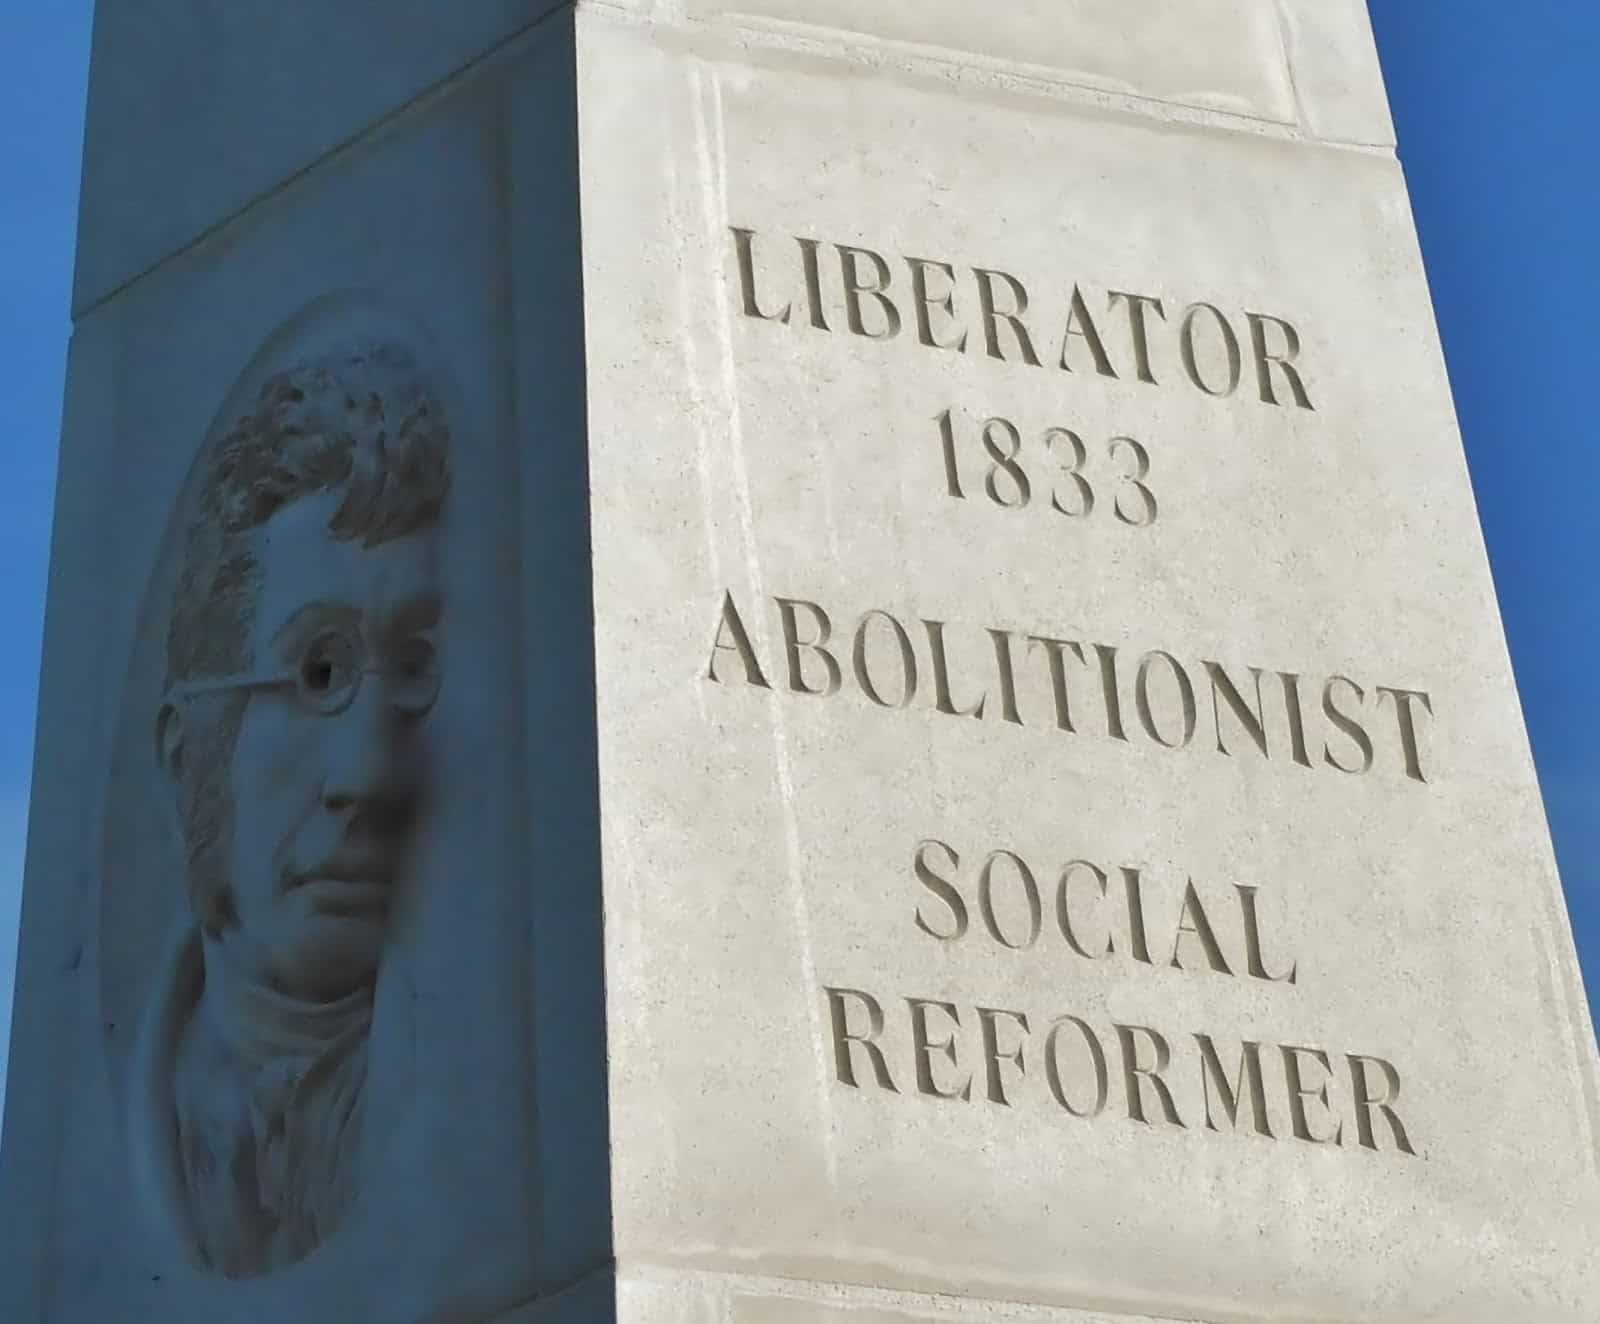 Bas-relief profile of a historical figure on a monument, with the words "liberator 1833 abolitionist social reformer" engraved beside it.